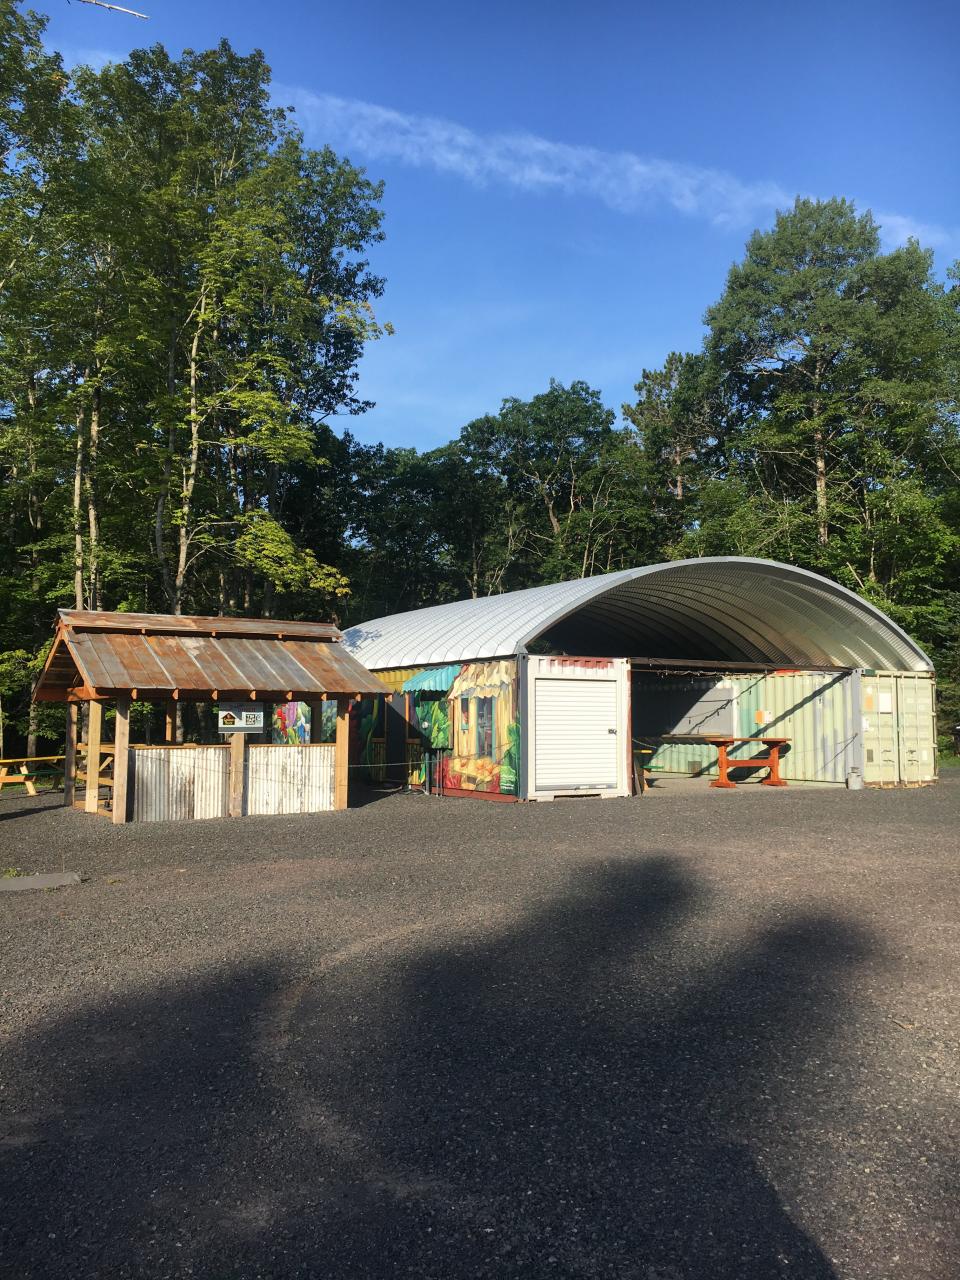 Delta Diner, a popular 1940s Silk City diner in the middle of the Chequamegon-Nicolet National Forest, in 2019 opened the Tin Tap House & Chicken Shack, serving Jamaican jerk chicken and craft beer out of refurbished shipping containers next to the diner.